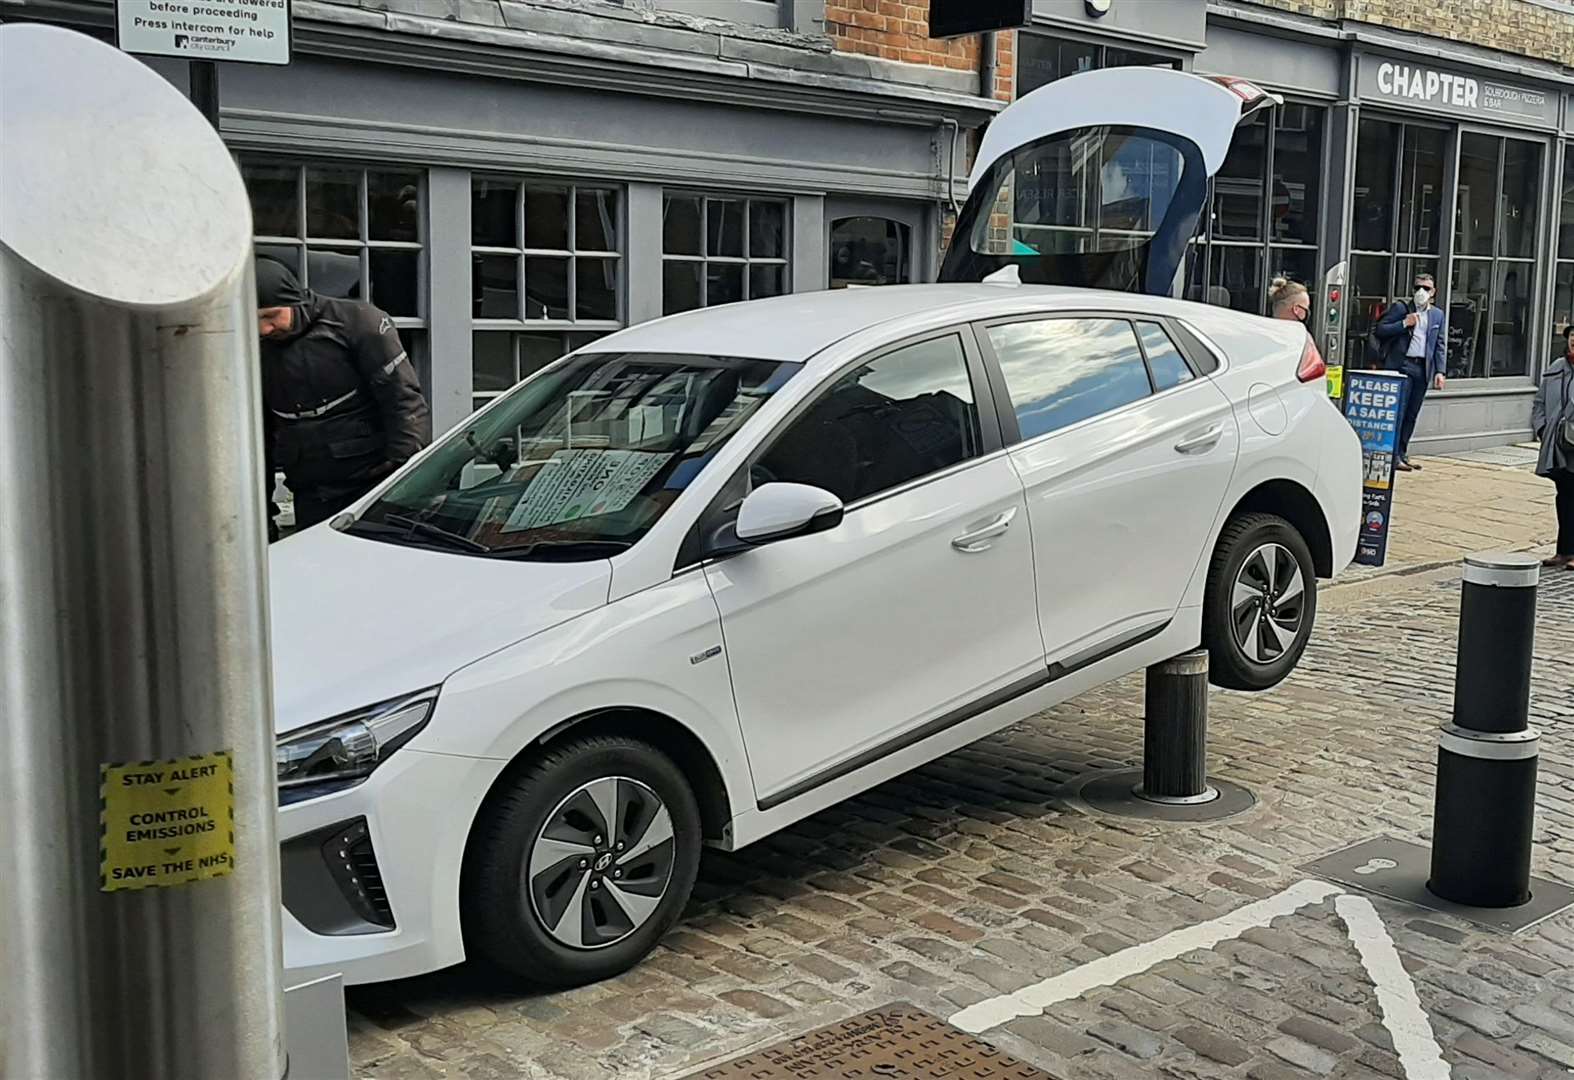 Earlier this month a Hyundai driver who tried to tailgate their way into the city failed to outsmart the bollards